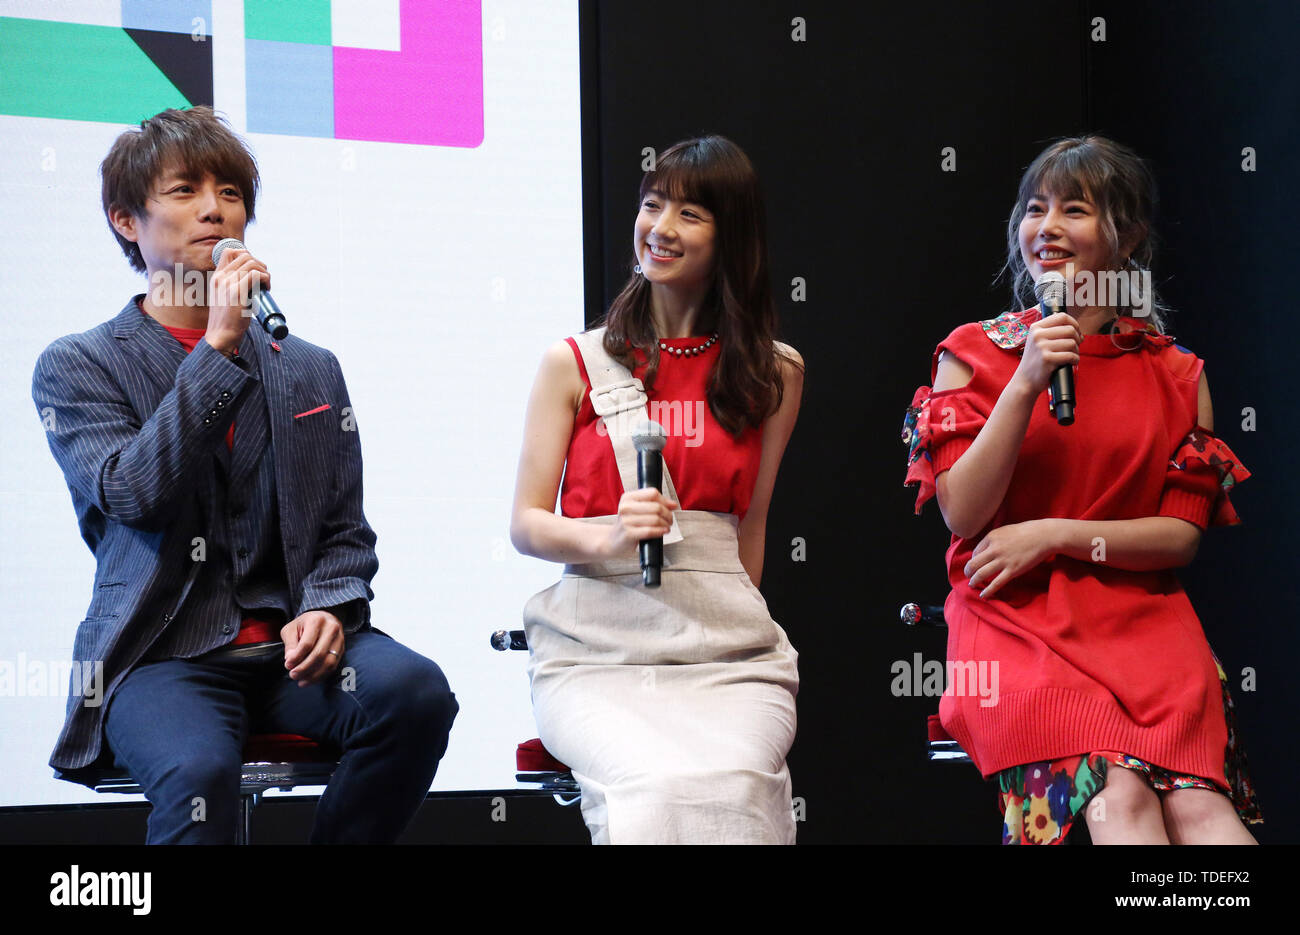 Tokyo, Japan. 14th June, 2019. (L-R) Japanese actor Taiyo Sugiura, TV personalities Yuko Ogura and Anna Sumitani hold a talk show at the annual International Tokyo Toy Show in Tokyo on Friday, June 14, 2019. Some 160,000 people are expecting to visit a four-day toy trade show which displays 35,000 latest toys from 40 countries. Credit: Yoshio Tsunoda/AFLO/Alamy Live News Stock Photo